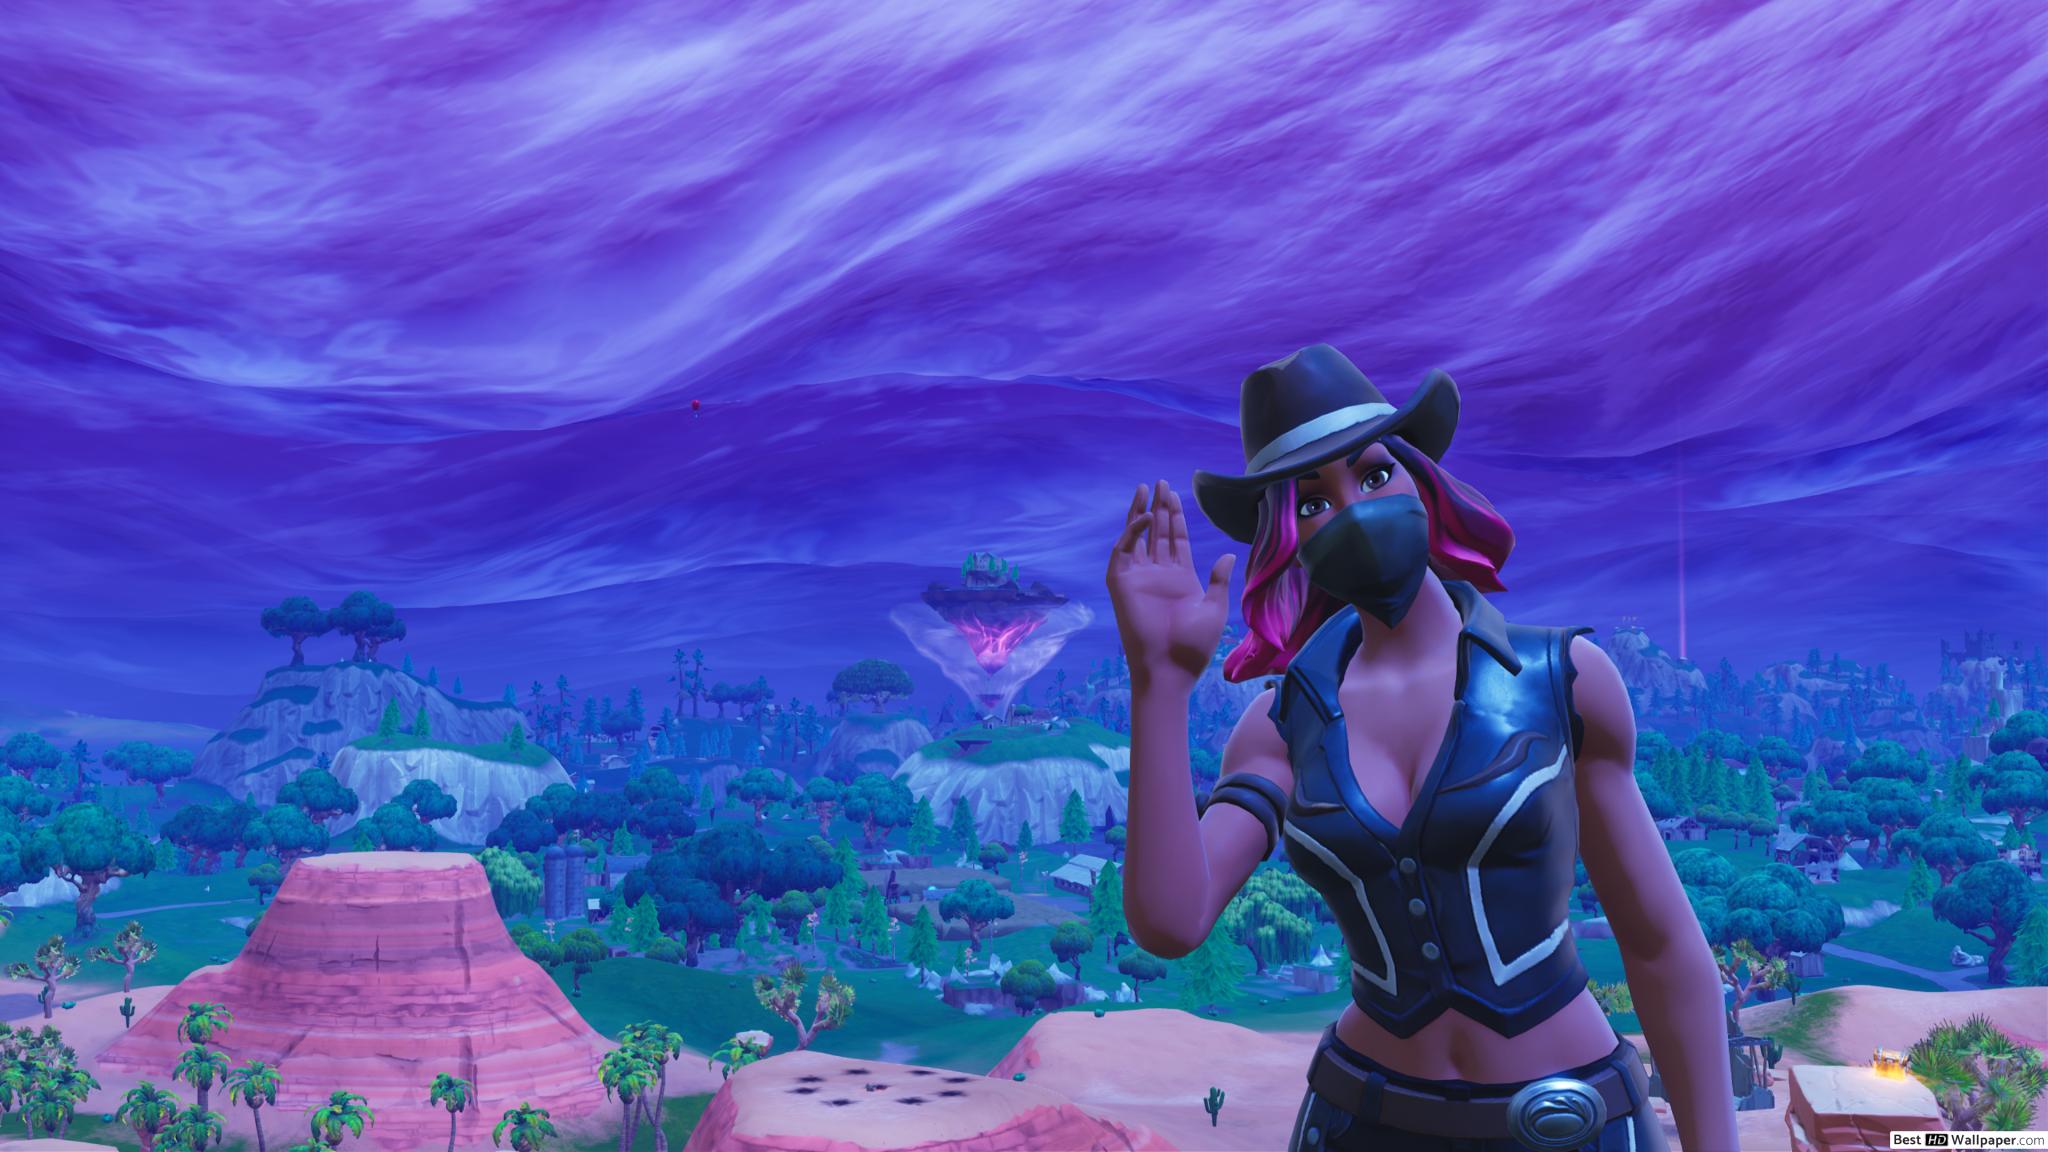 Fortnite 2048x1152 posted by Ryan Sellers